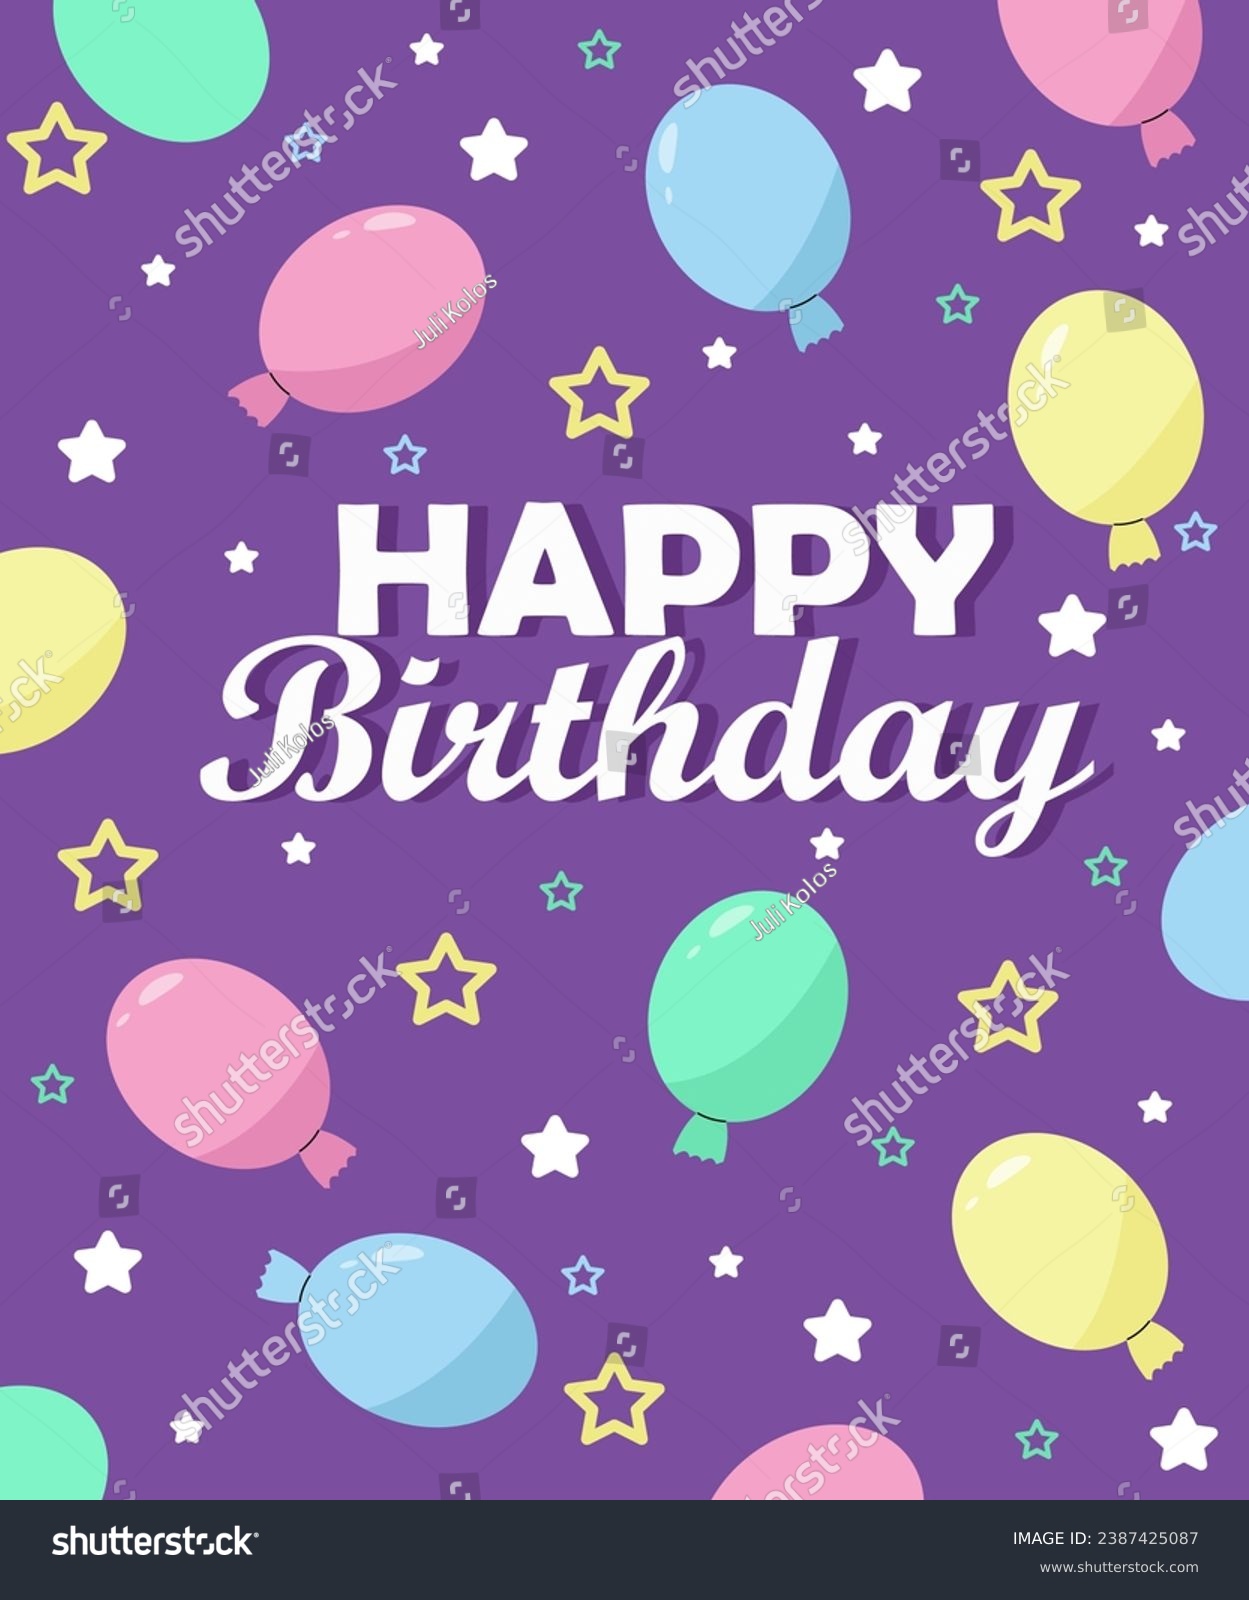 SVG of happy birthday card, with balloons, vector illustration svg